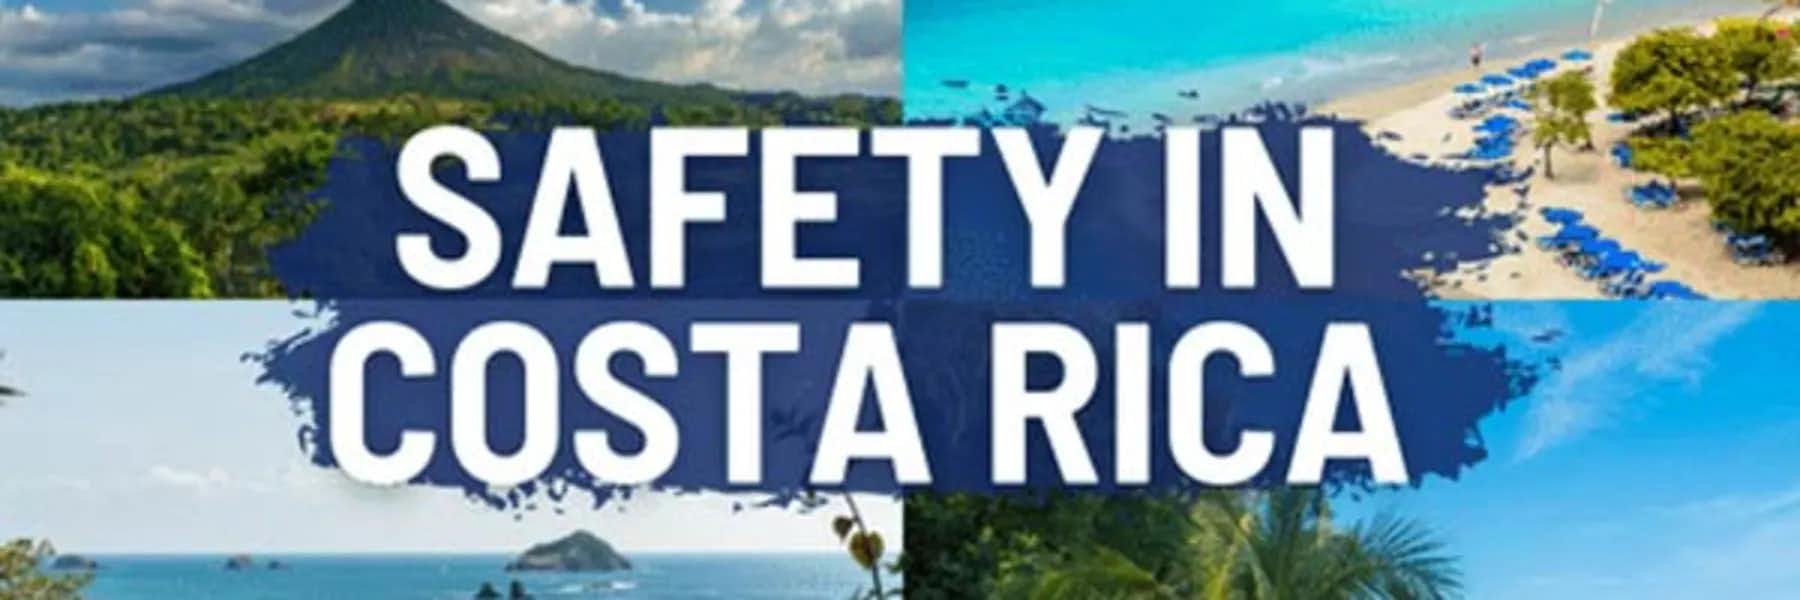 is it safe to visit costa rica now